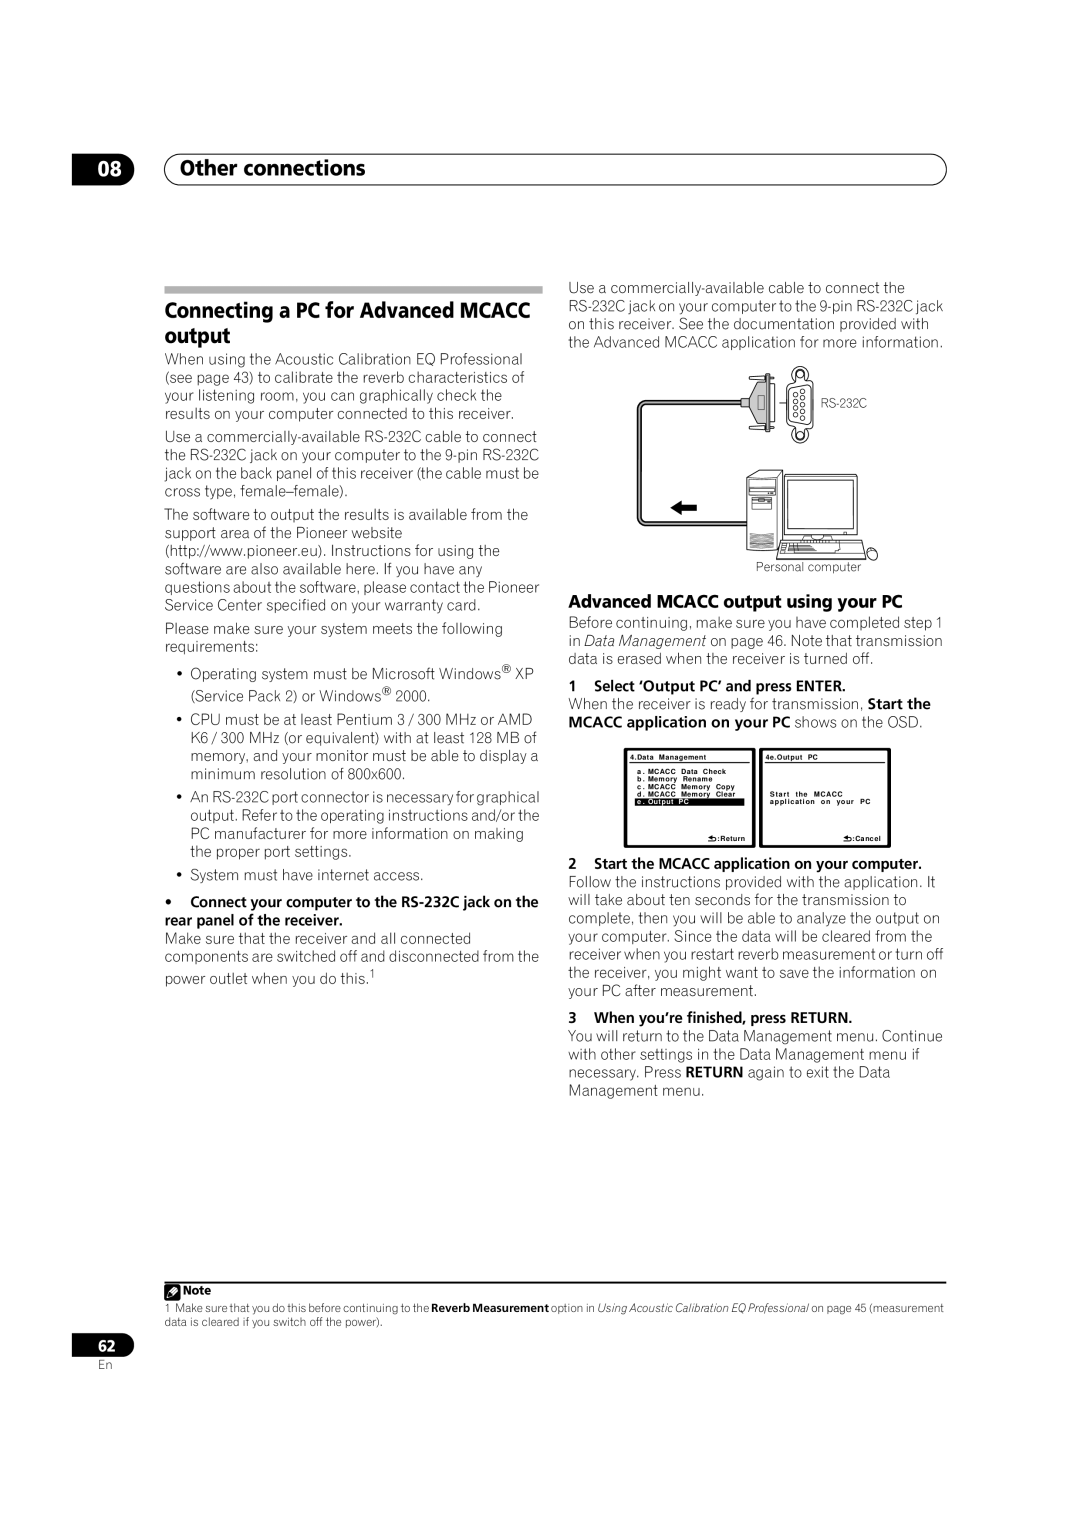 Pioneer VSX-LX51 manual Connecting a PC for Advanced MCACC output, Advanced MCACC output using your PC, 08Other connections 